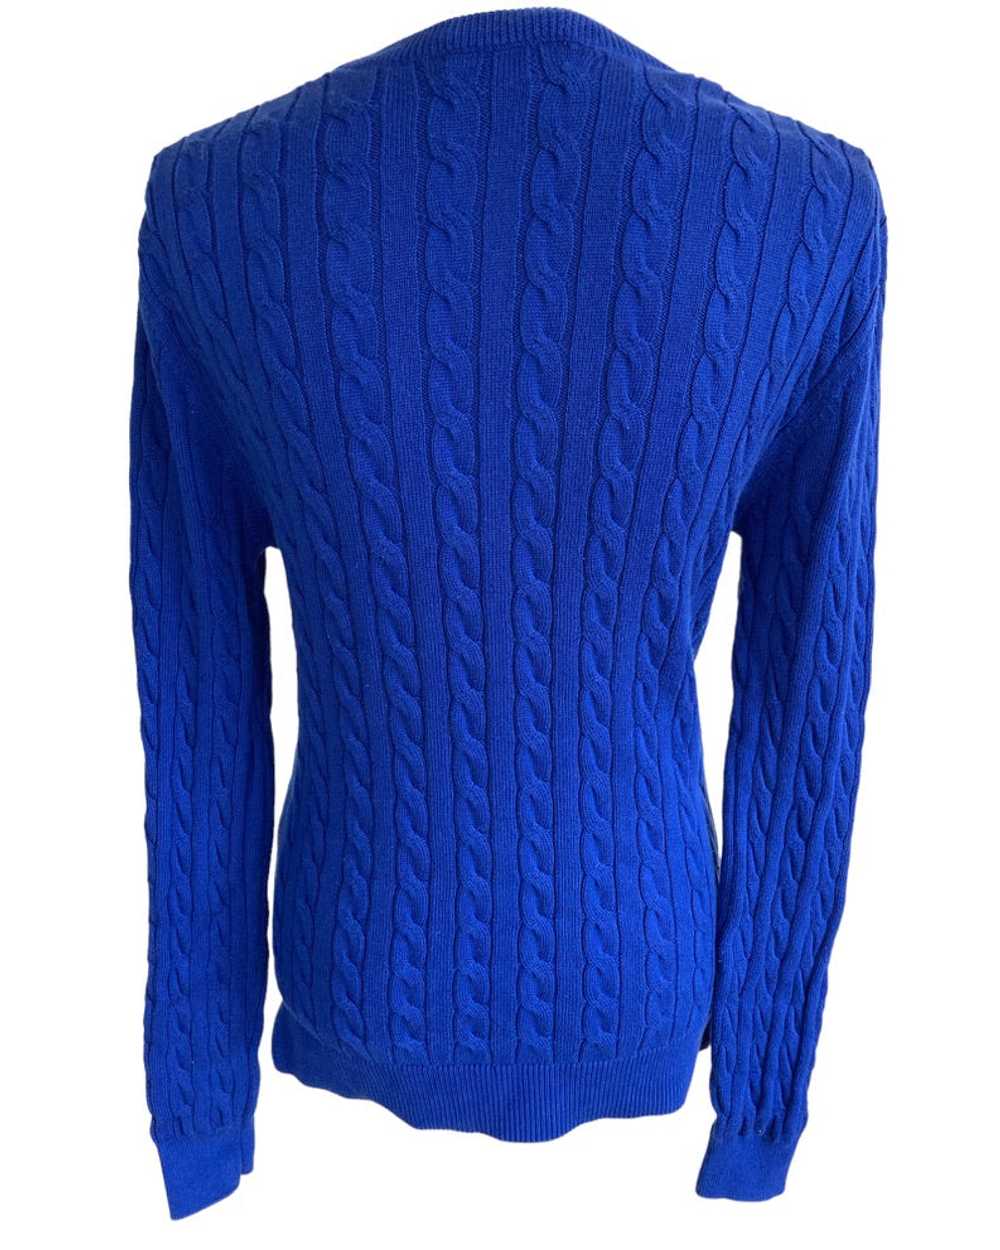 Lacoste Royal Blue Cable Knit Sweater, S - image 5